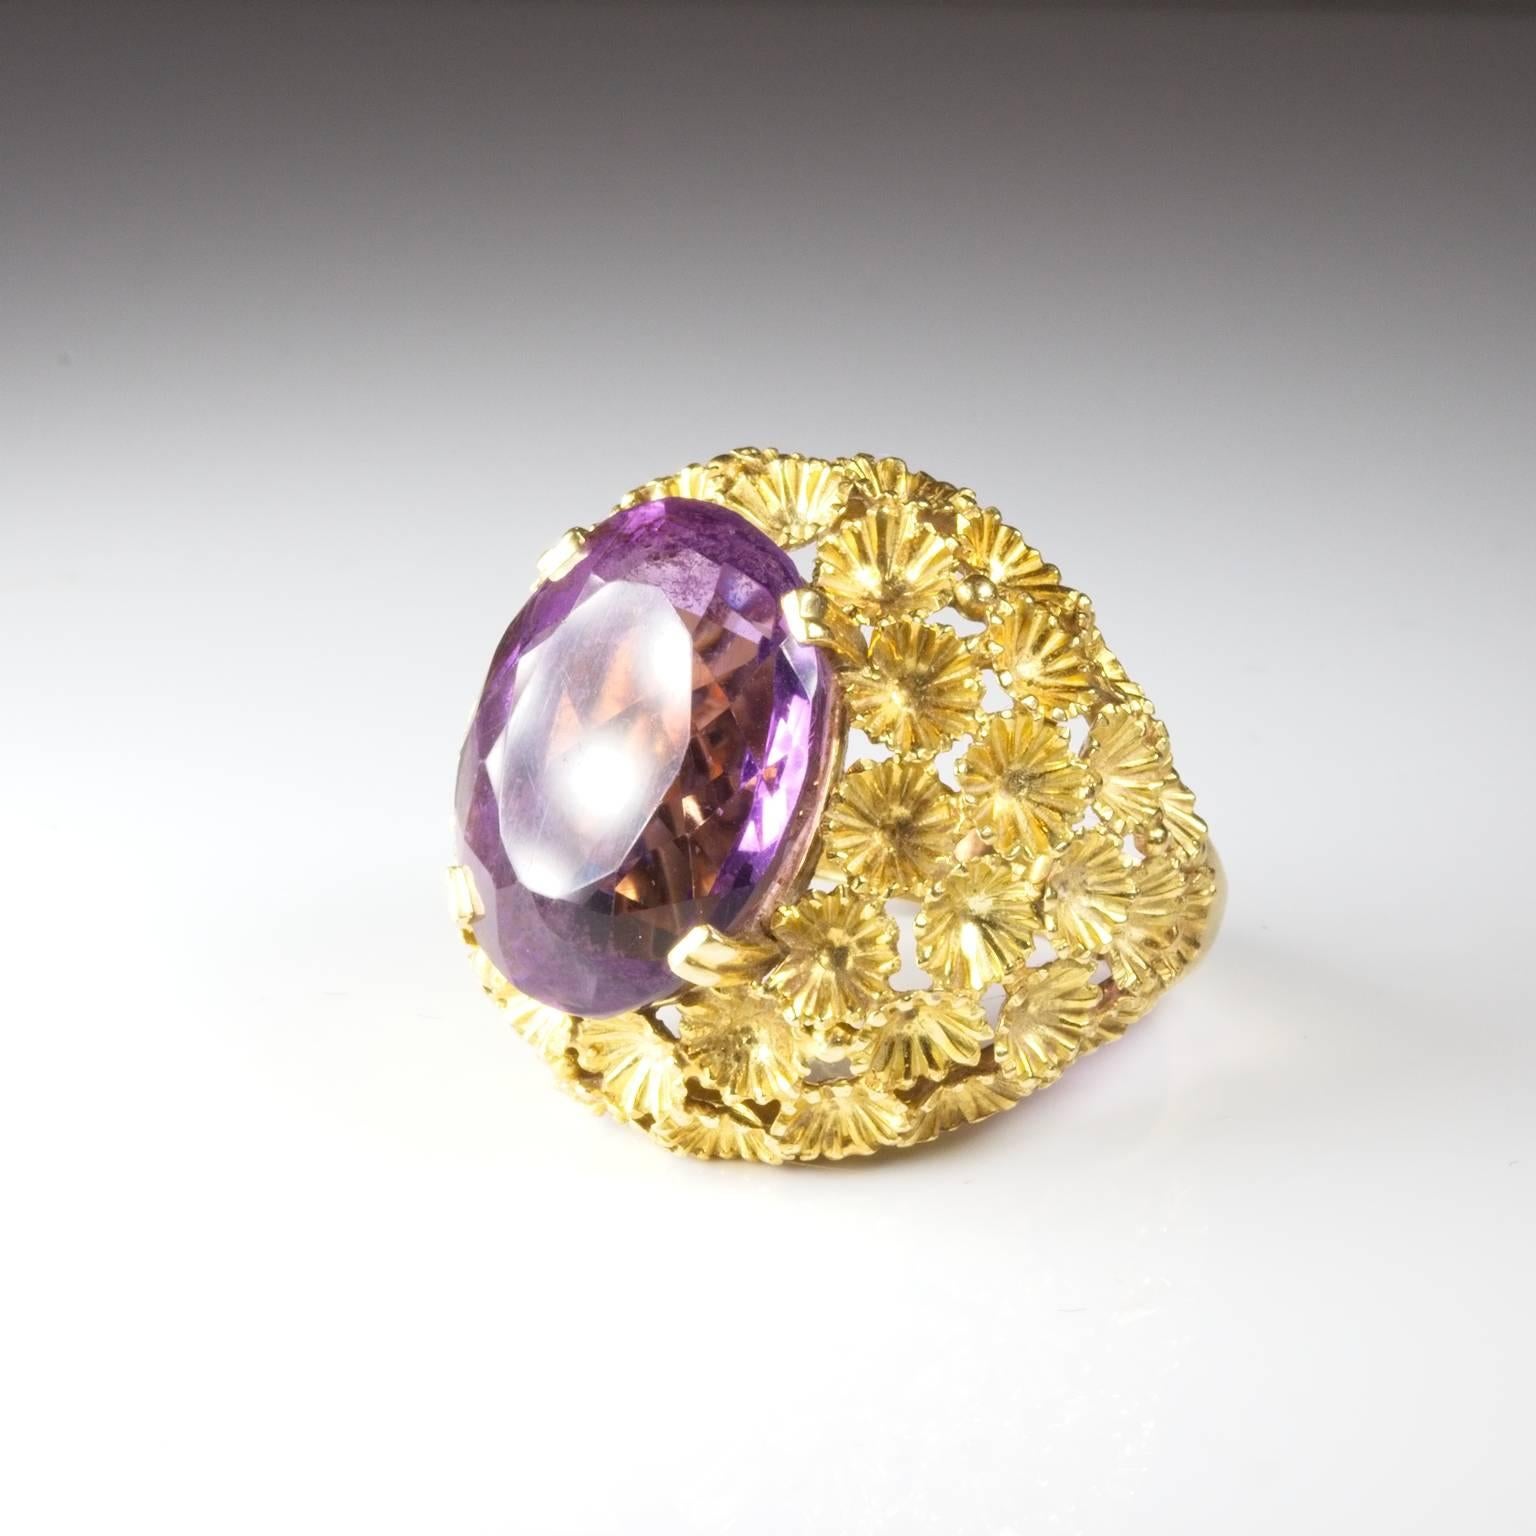 Stunning bold amethyst ring set with complex floral designs in 18ct Gold. French Hallmarks. Stone measures 18mm x 13mm x 9mm.  Currently size O (US = 7) and will be safely sized by our expert jewellers free of charge if required. 18ct, French,